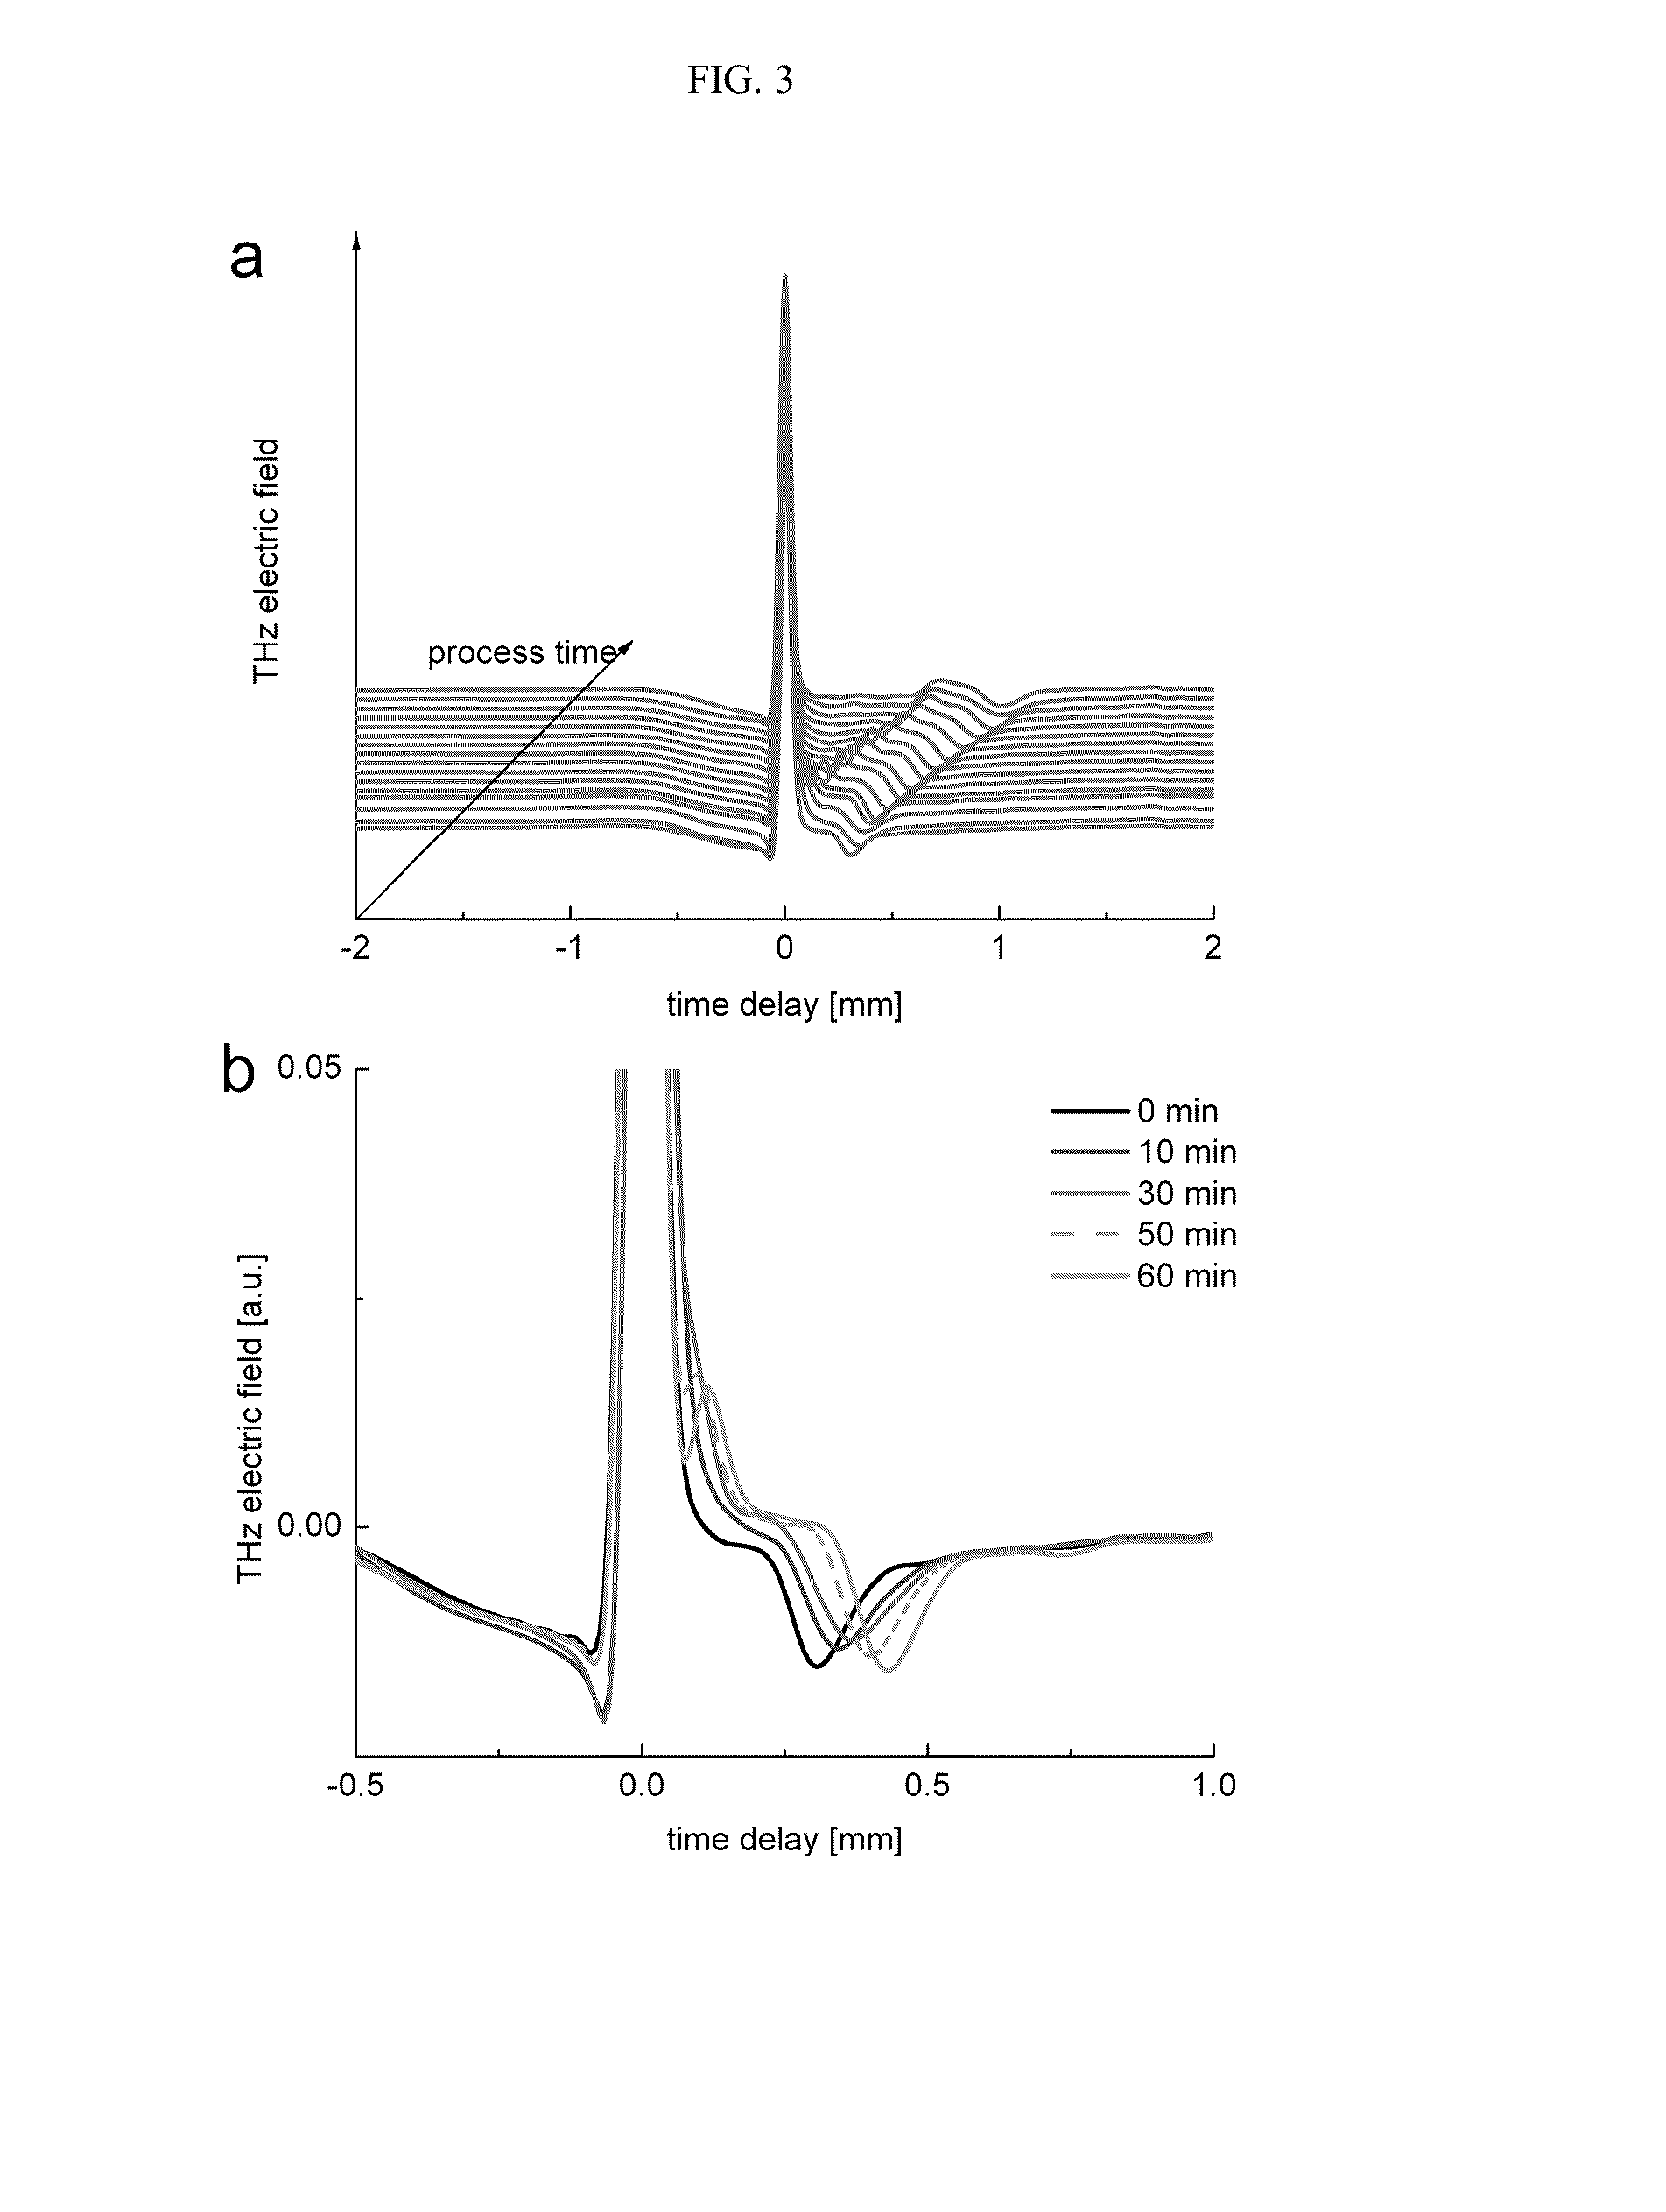 Process for manufacturing a pharmaceutical dosage form comprising nifedipine and candesartan cilexetil